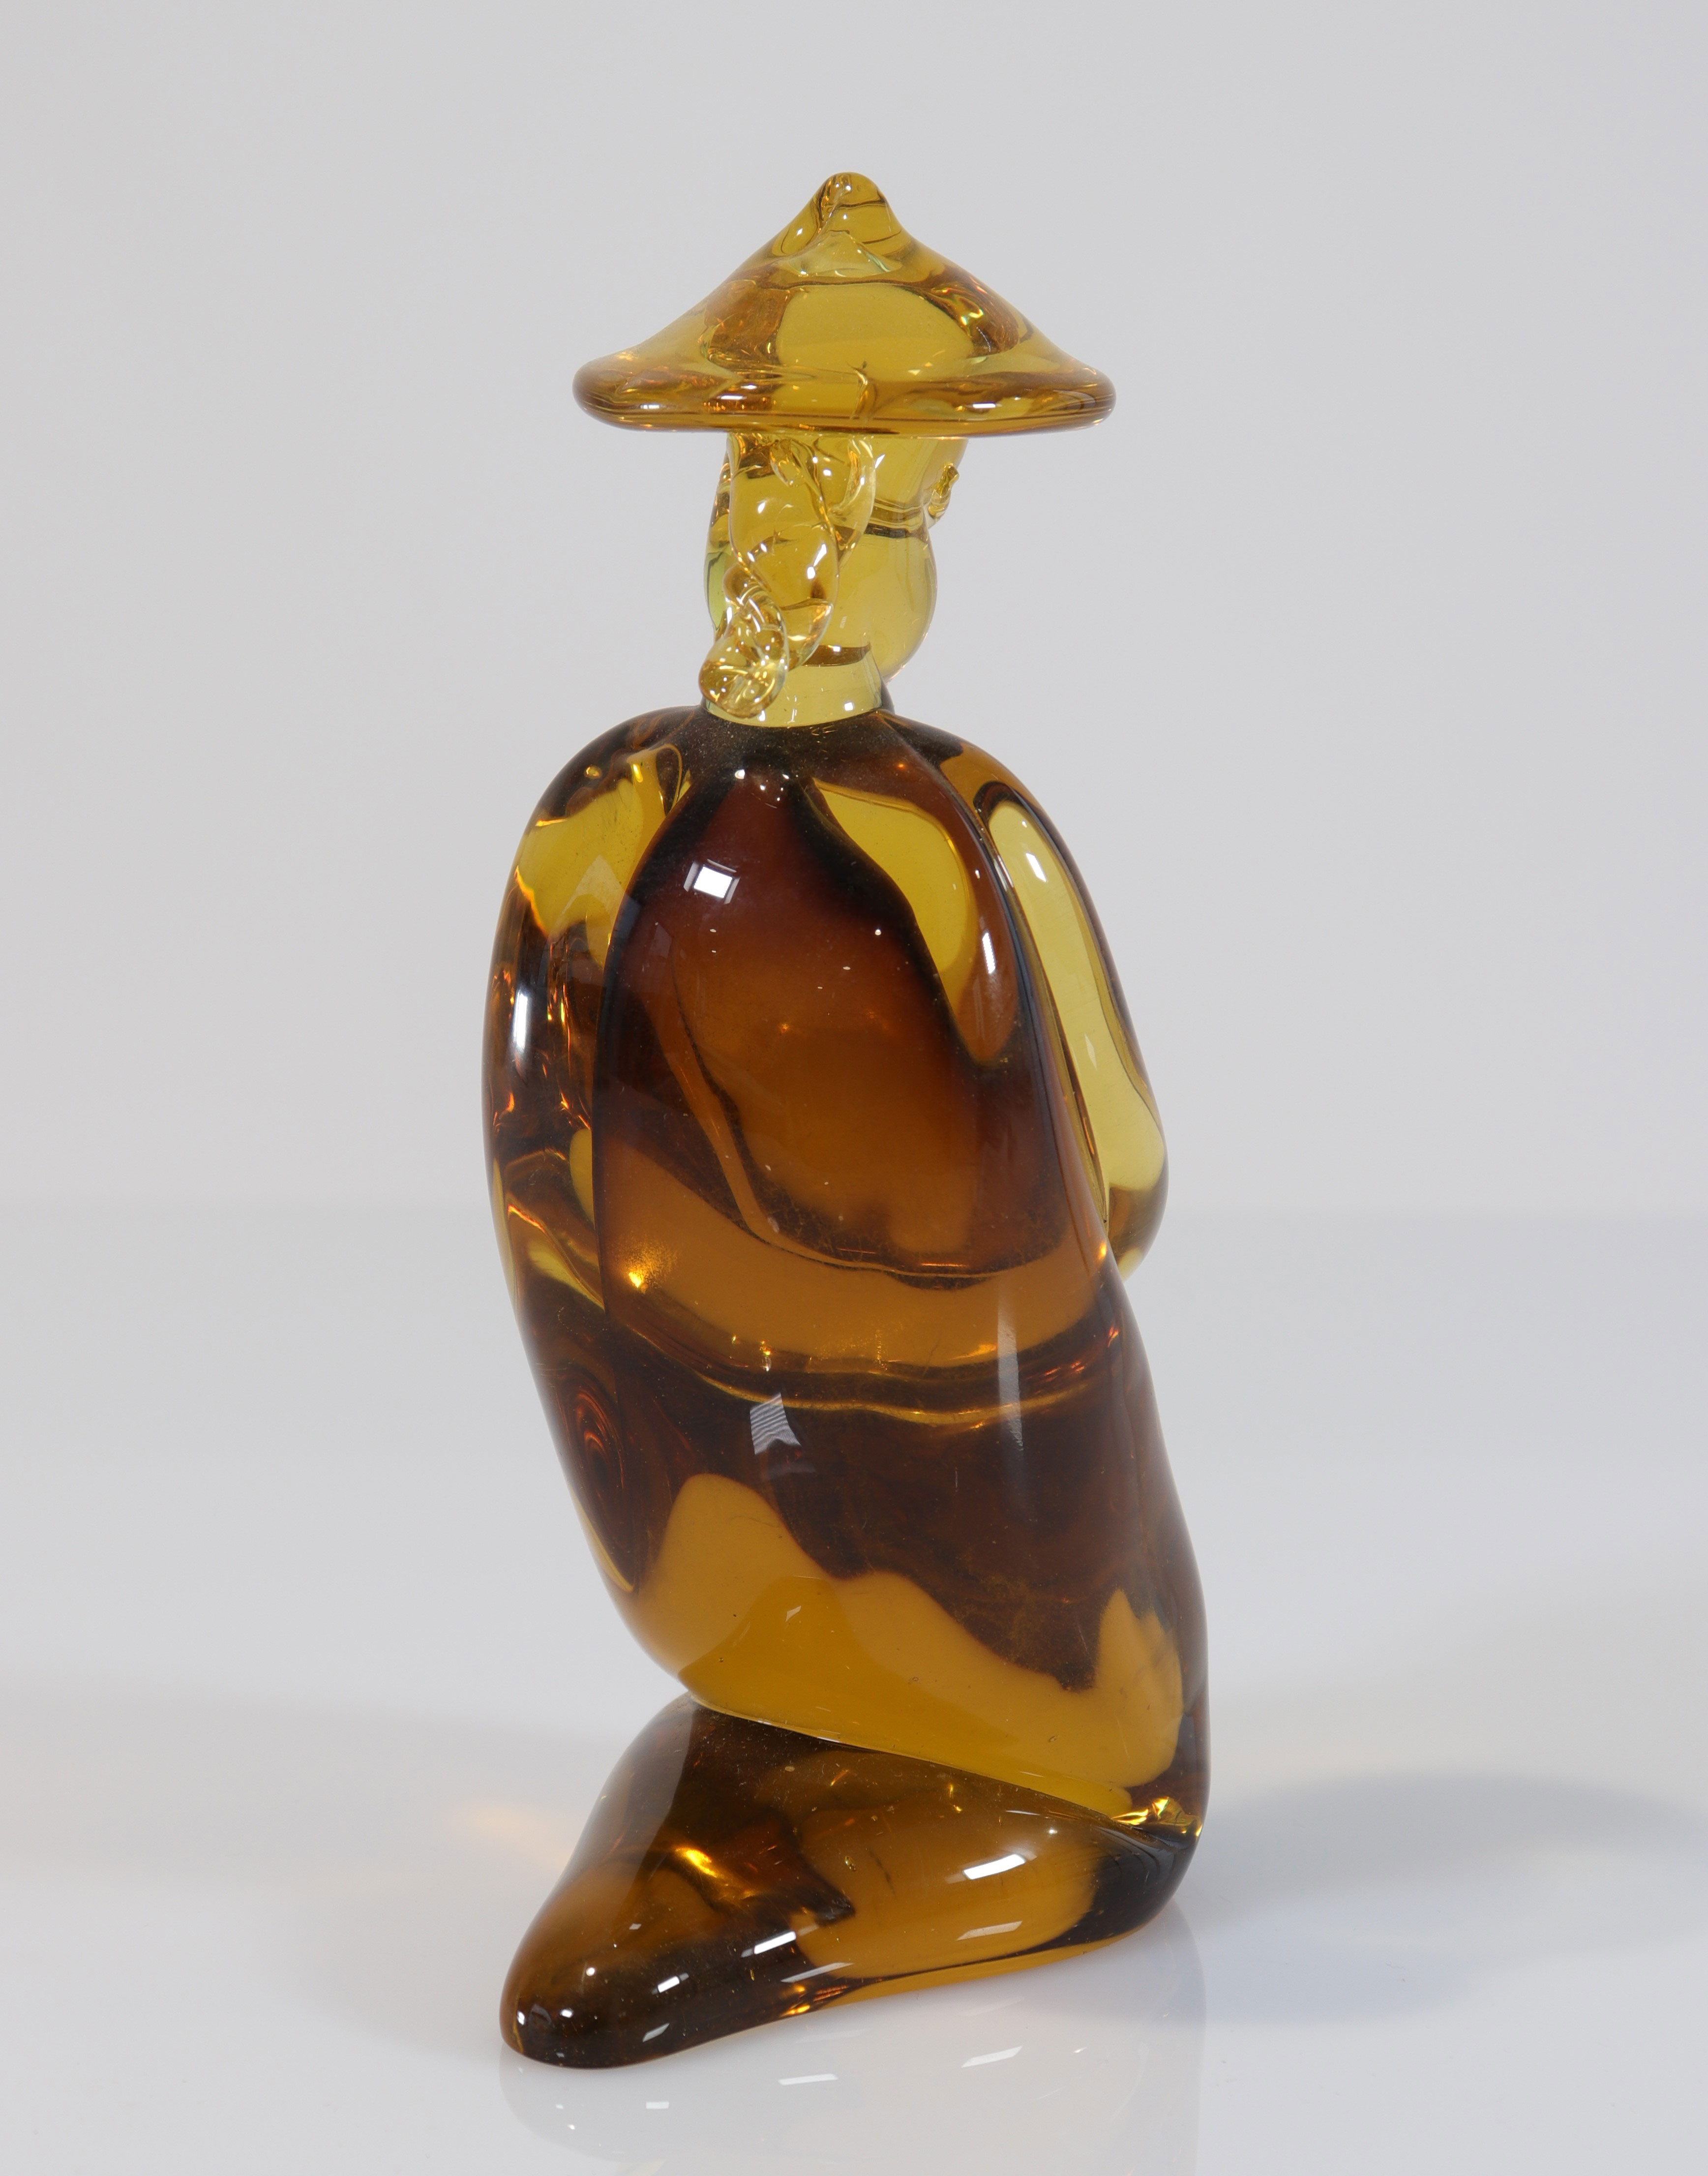 Italy - Merano, yellow glass sculpture, depicting a Chinese - 1960 - Image 3 of 4